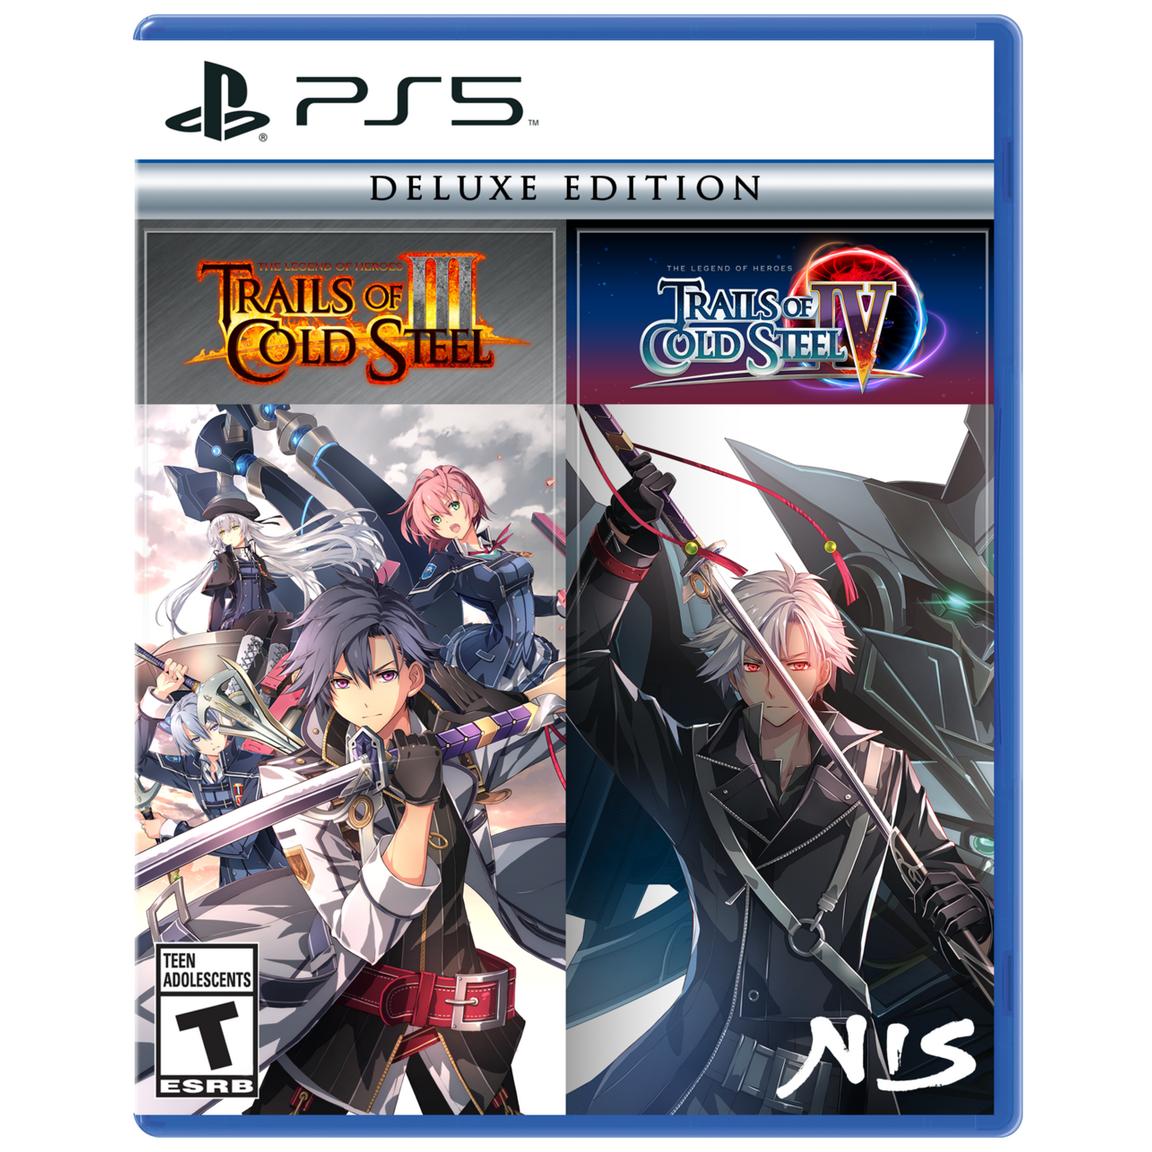 legend of heroes trails to azure deluxe edition [ps4 английская версия] Видеоигра The Legend of Heroes: Trails of Cold Steel III / The Legend of Heroes: Trails of Cold Steel IV - Deluxe Edition - PlayStation 5